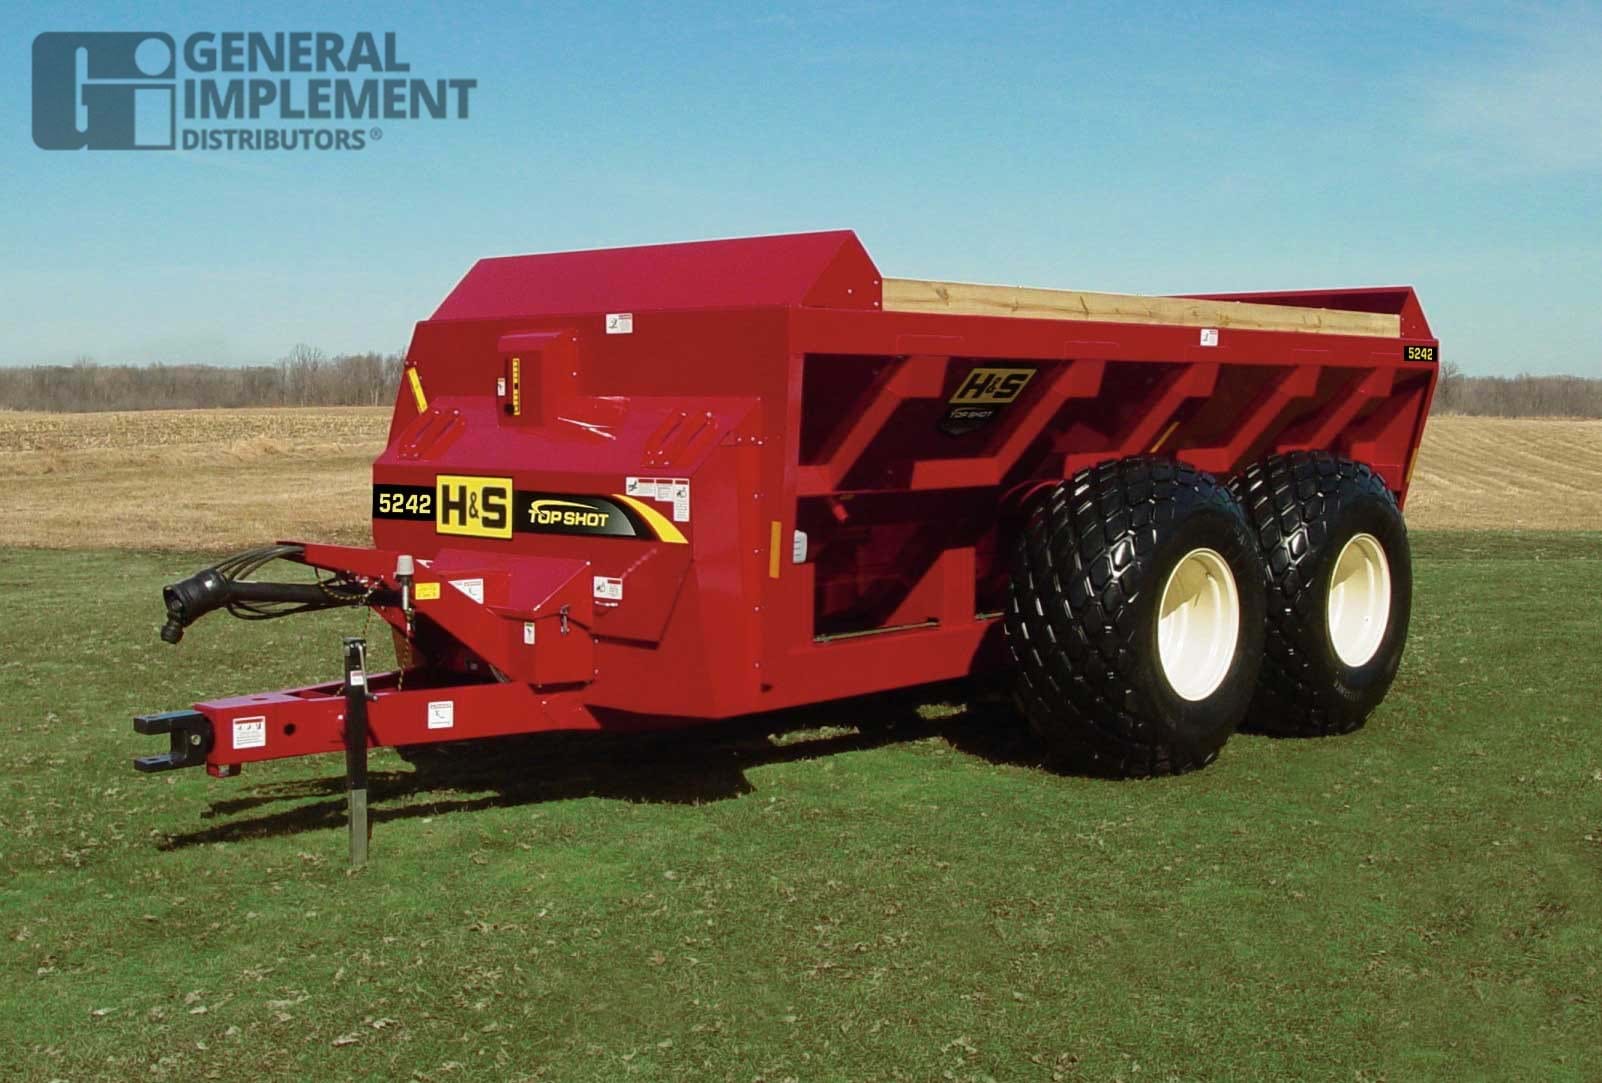 H&S Manufacturing SIDE DISCHARGE MANURE SPREADERS